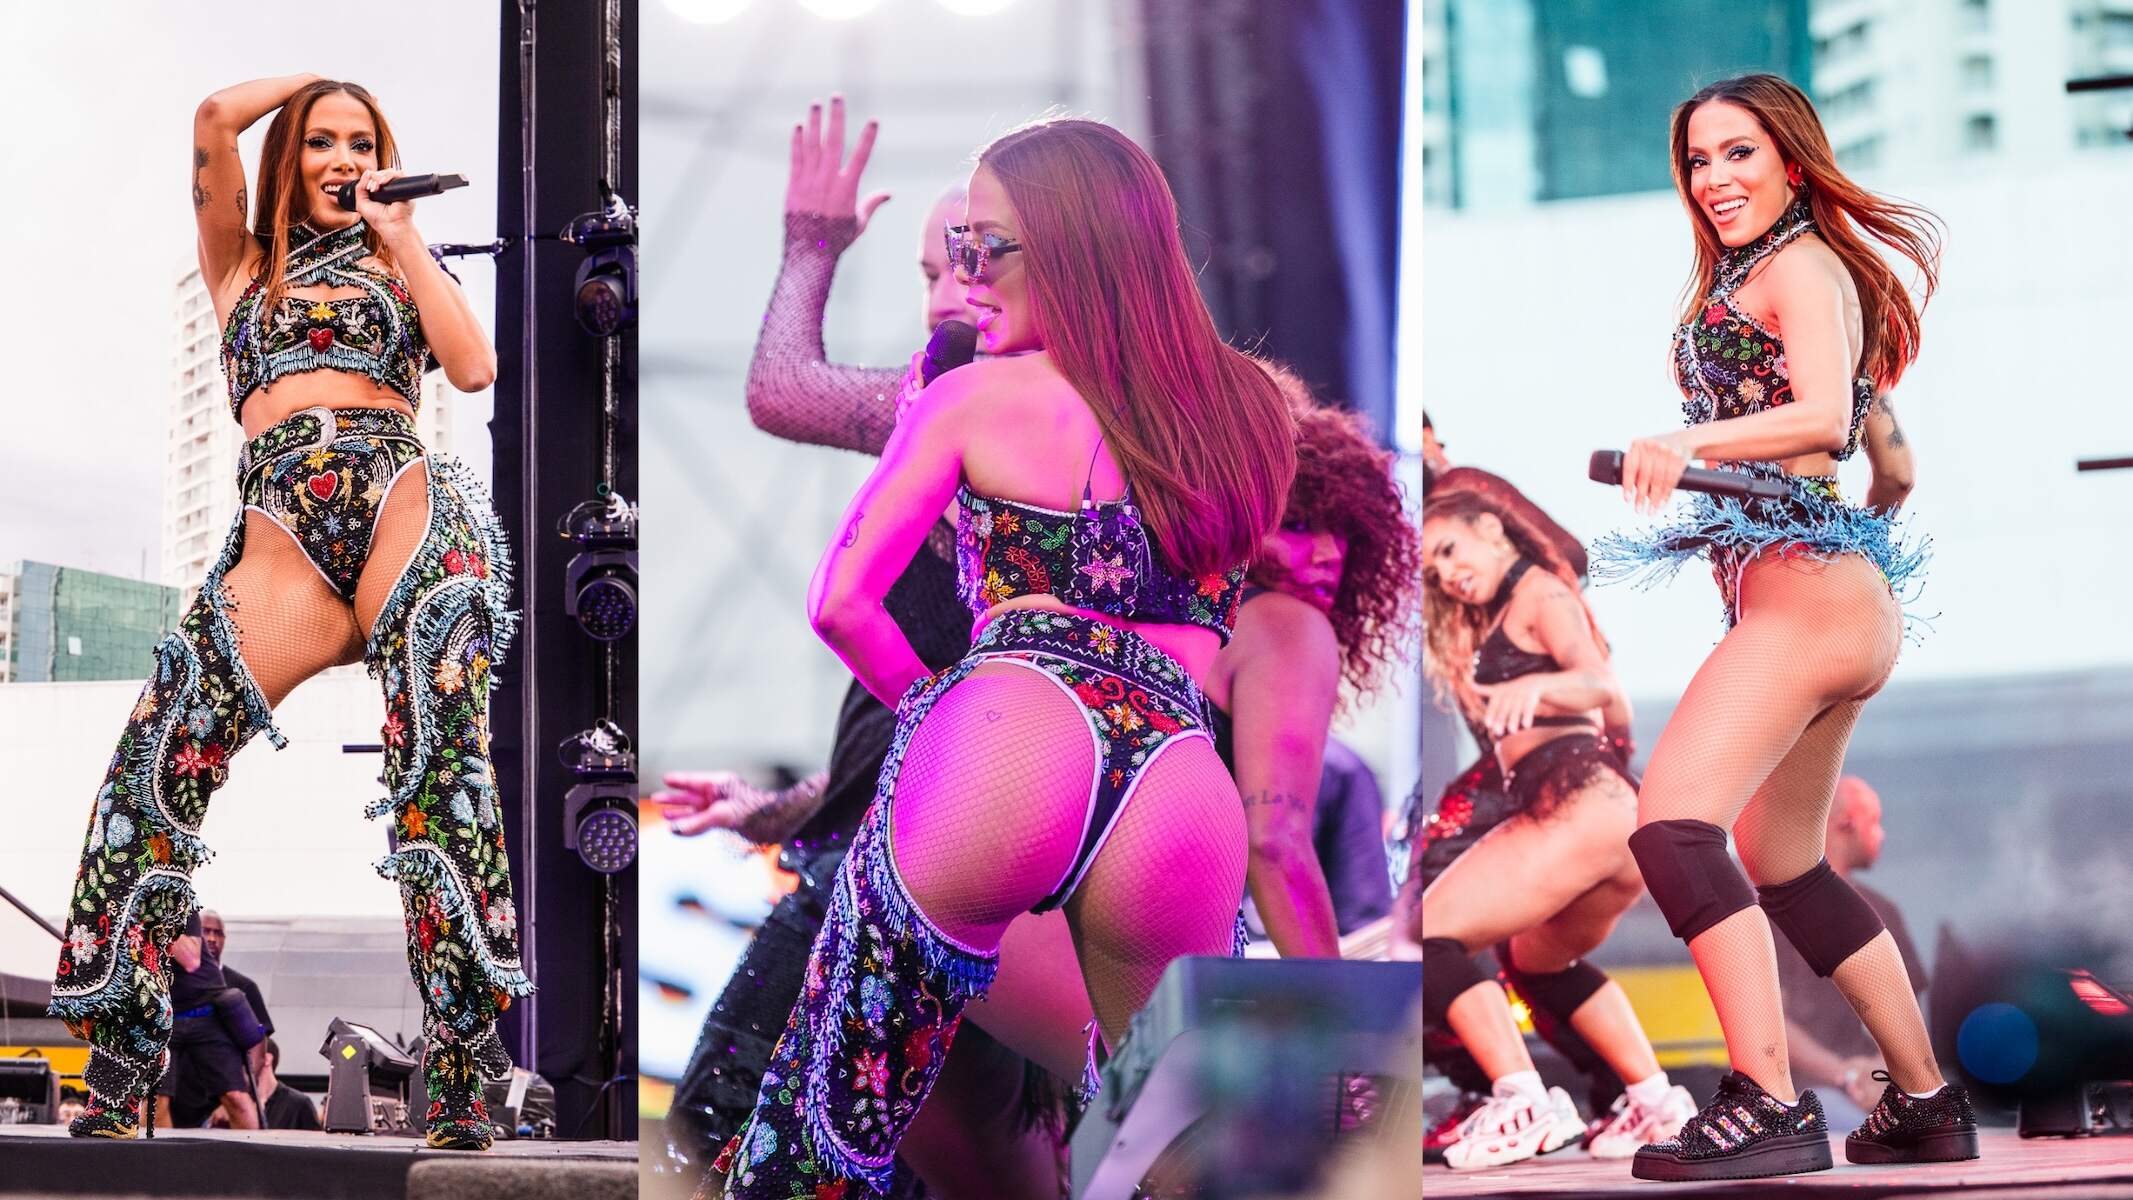 Brazilian singer Anitta wears backless chaps during a performance in Sao Paulo, Brazil